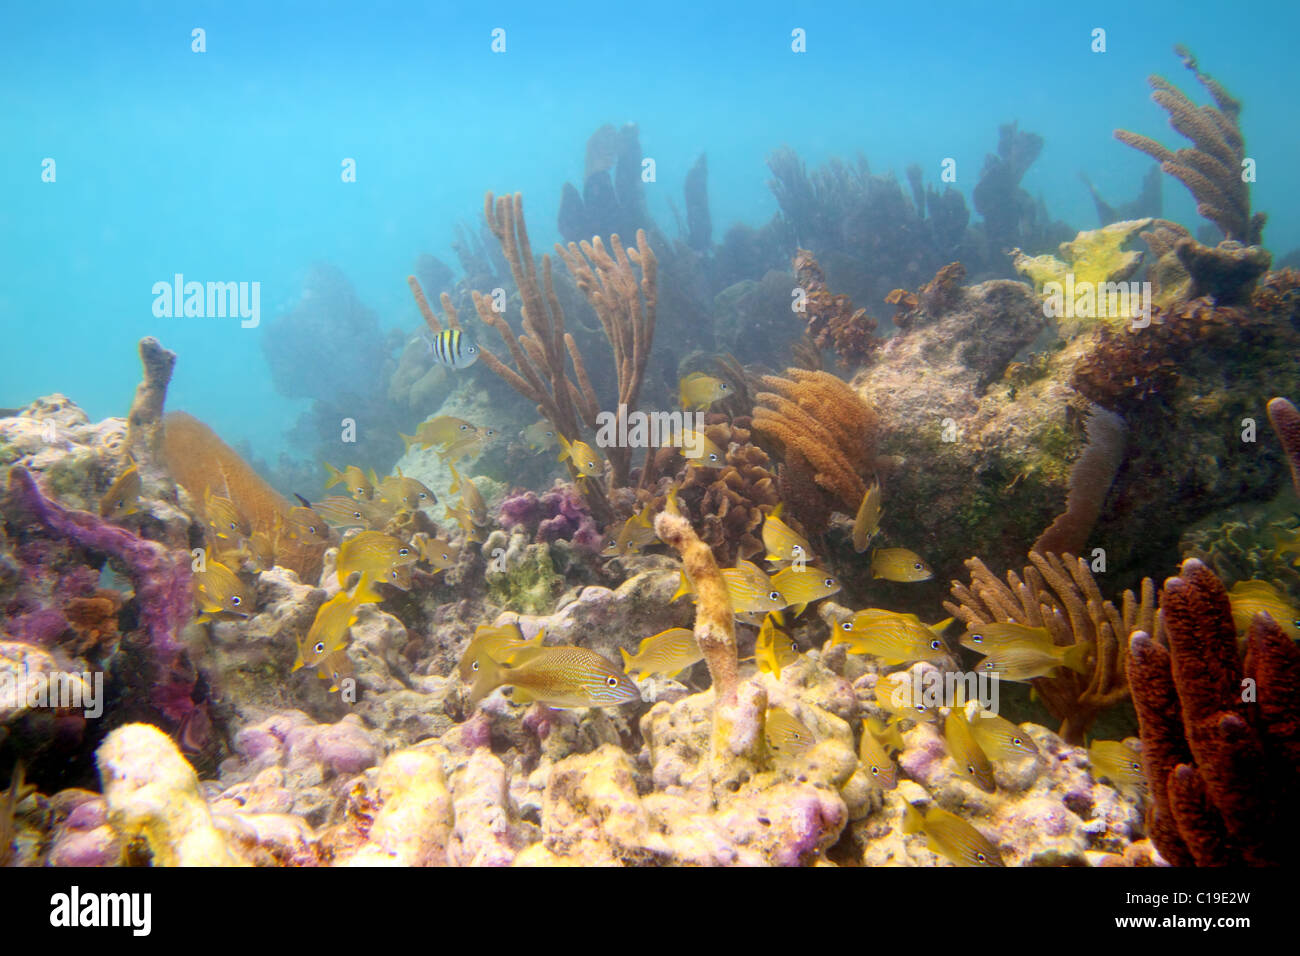 Coral reef in Mayan Riviera Cancun Mexico underwater Stock Photo